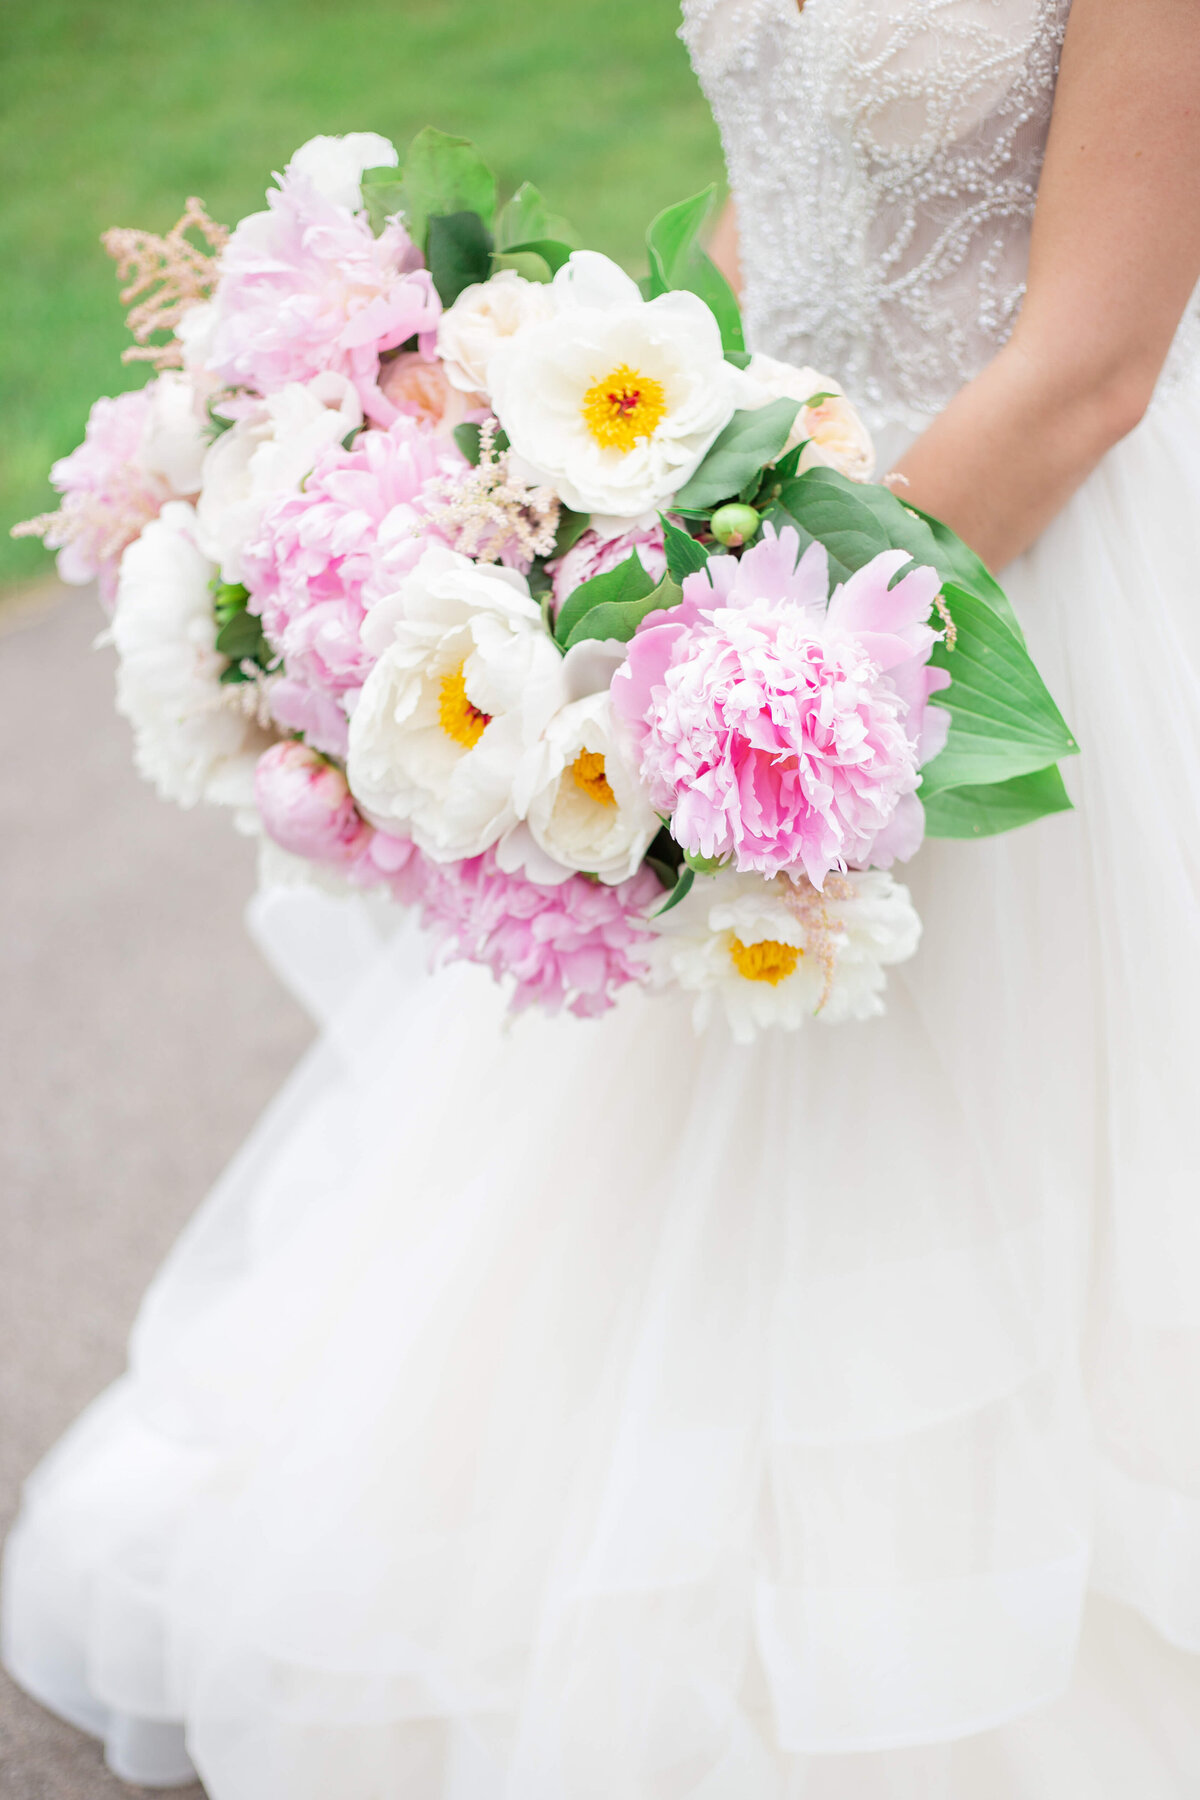 Top-Bride-holding-bouquet-of-bright-spring-colors-shot-by-Bethany-Lane-Photography